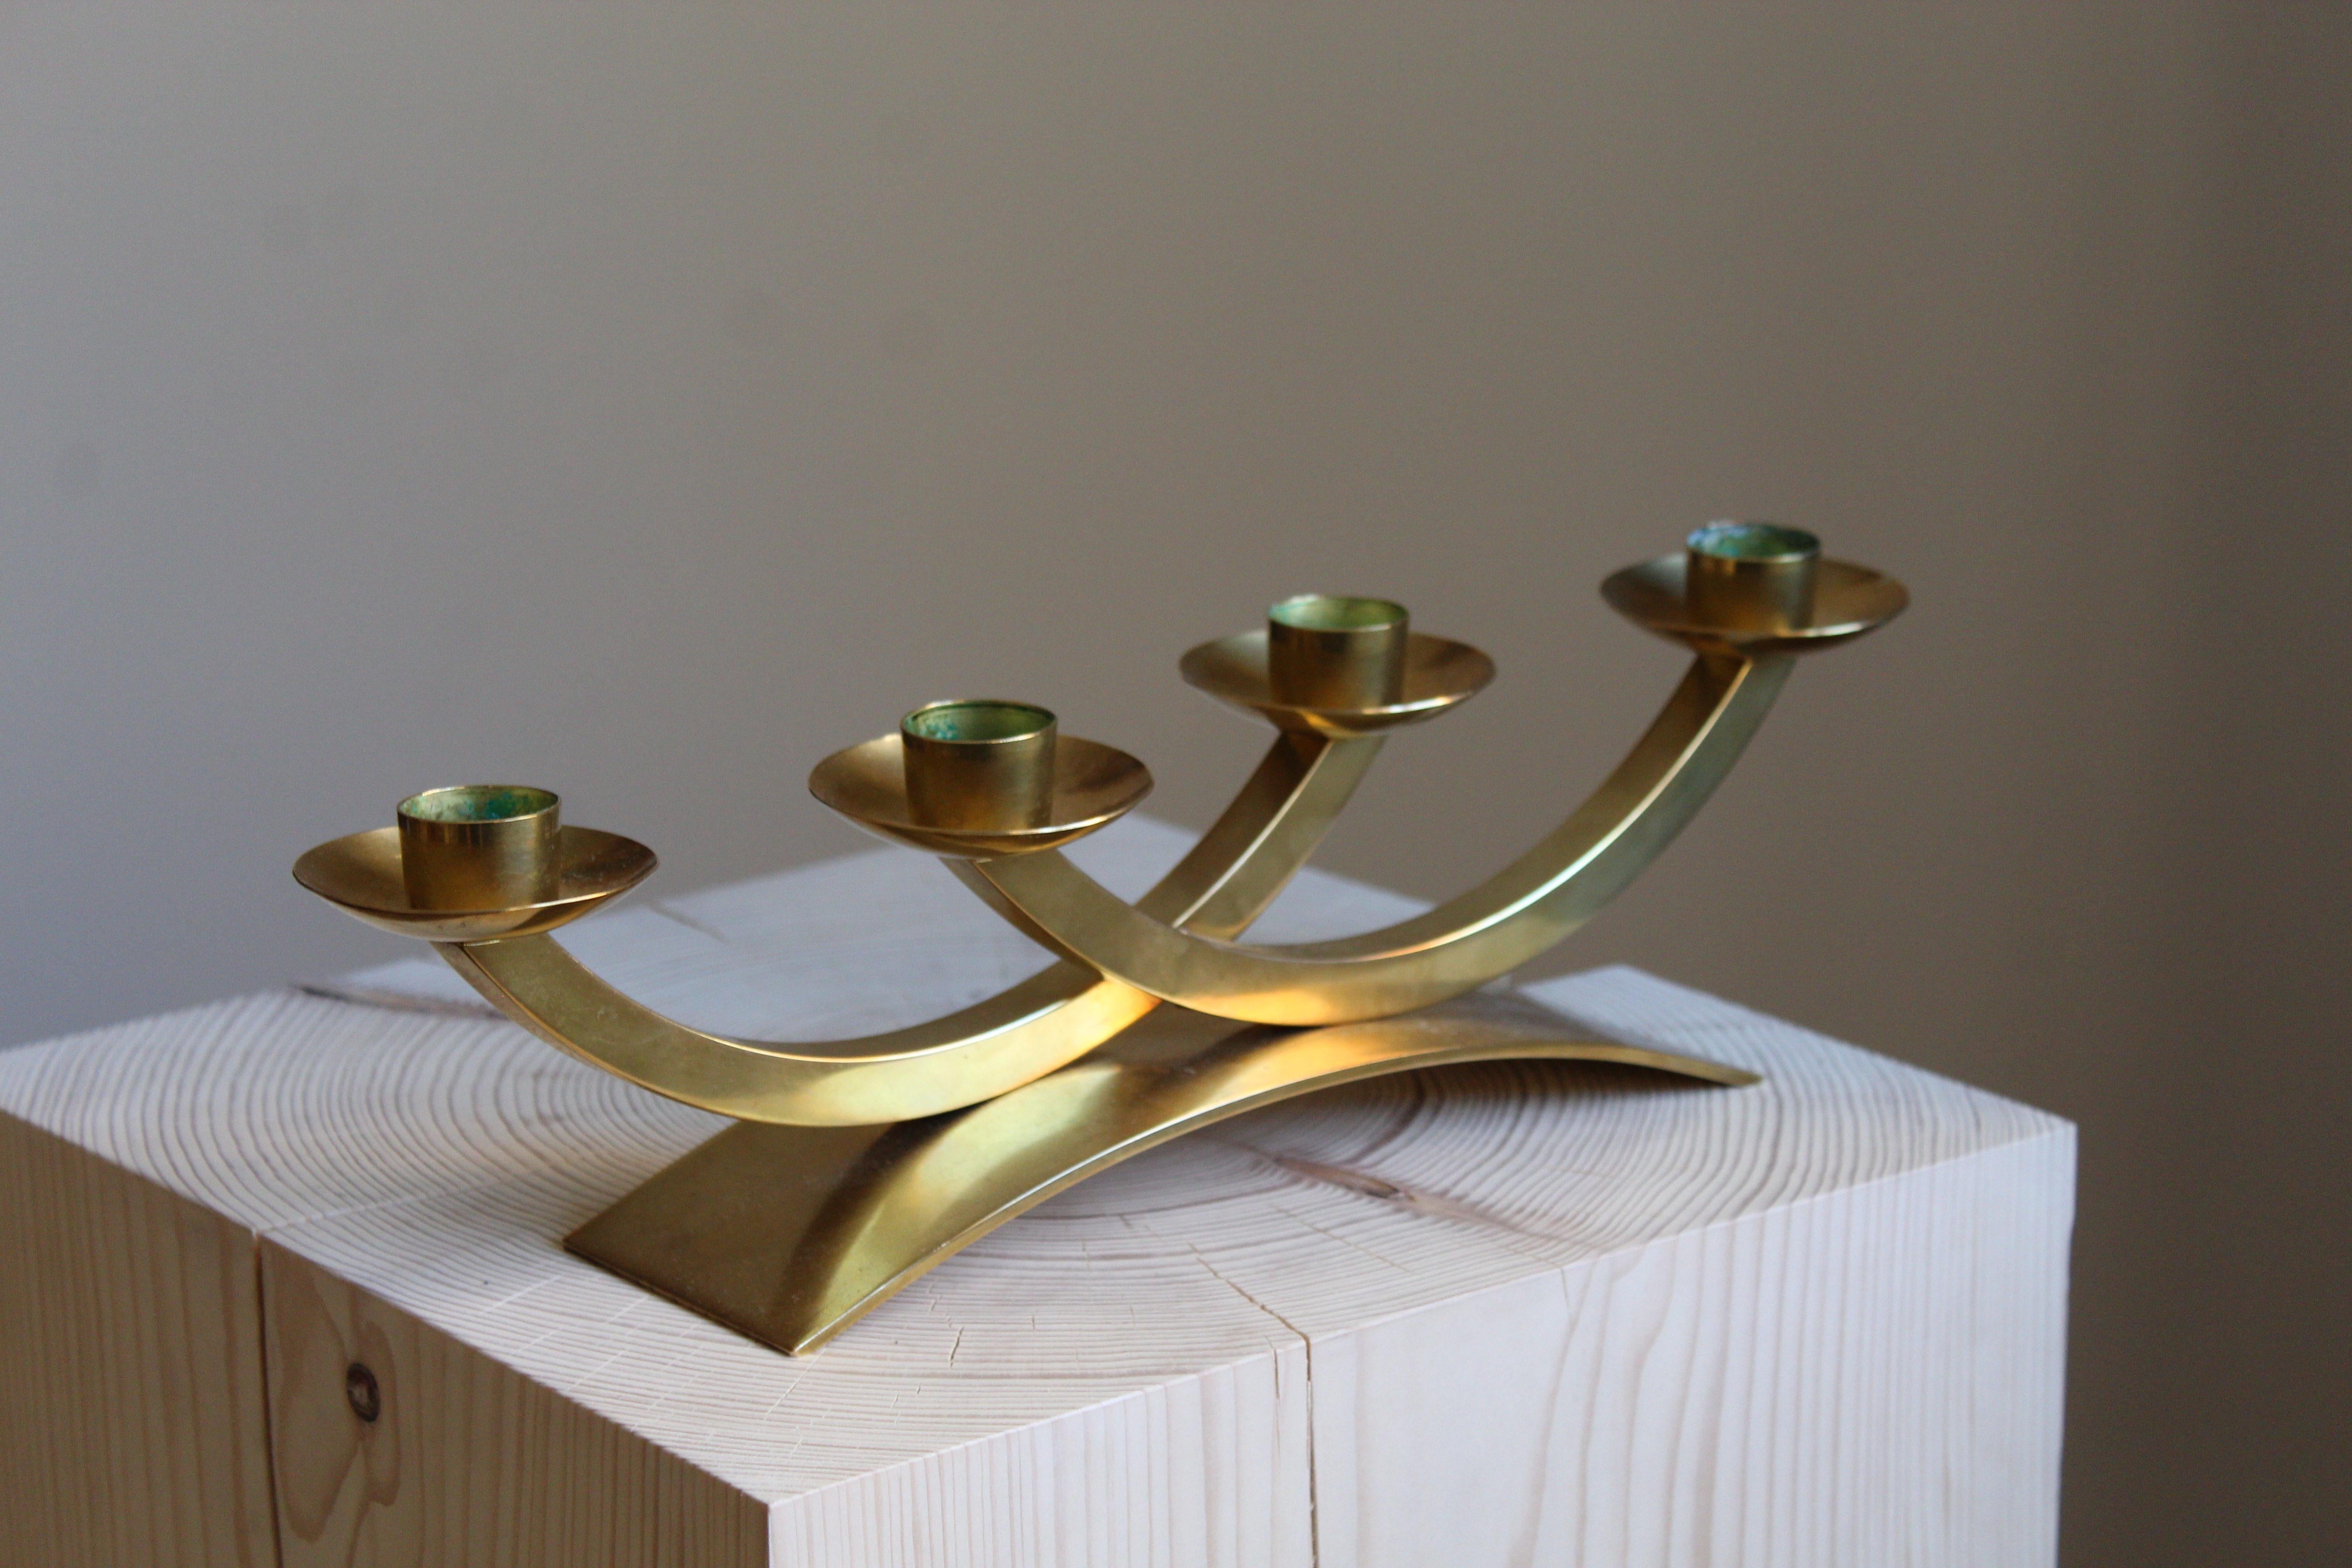 A candelabra, Sweden, 1950s. In brass.

Other designers of the period include Piet Hein, Paavo Tynell, Josef Frank, and Jean Royère.

